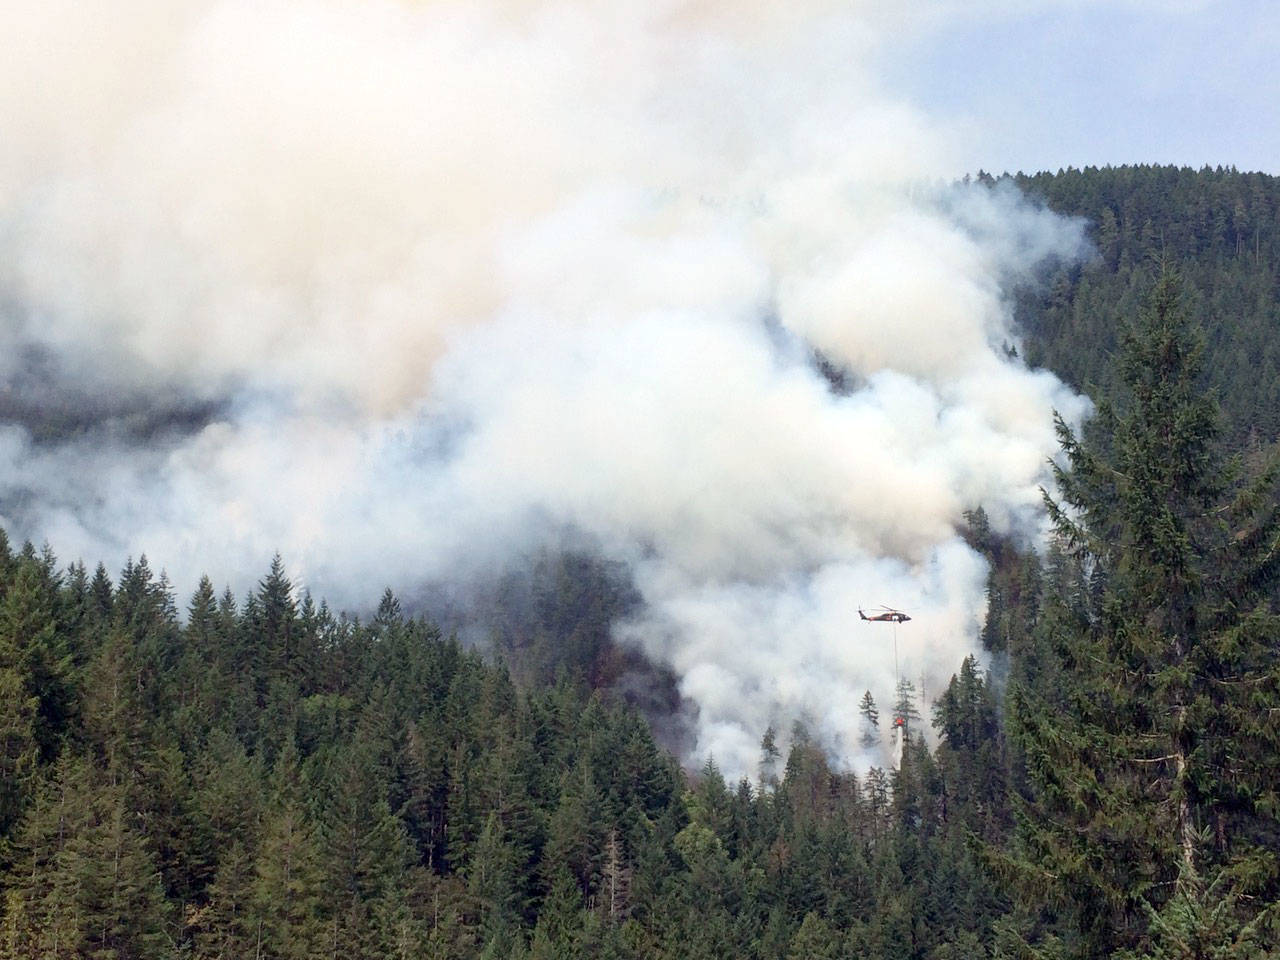 Smoke from the Maple Fire in Mason County billows out from the trees. (State Department of Natural Resources)